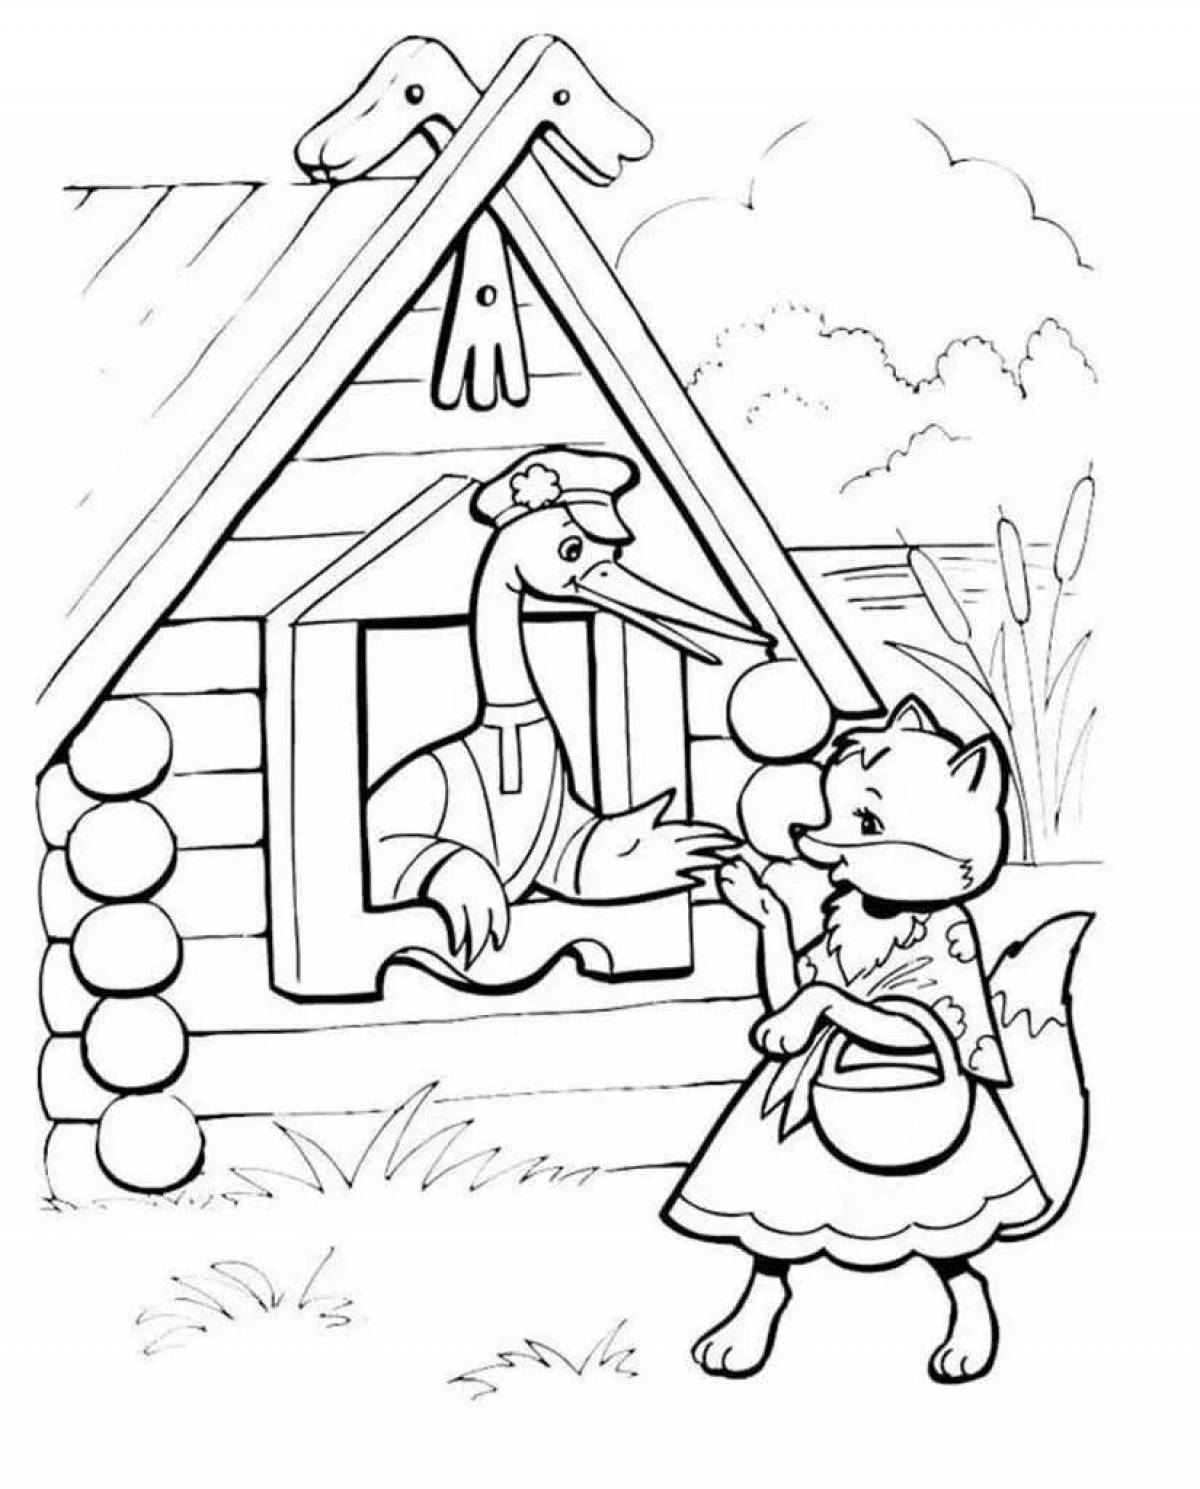 Live fox and jar coloring book